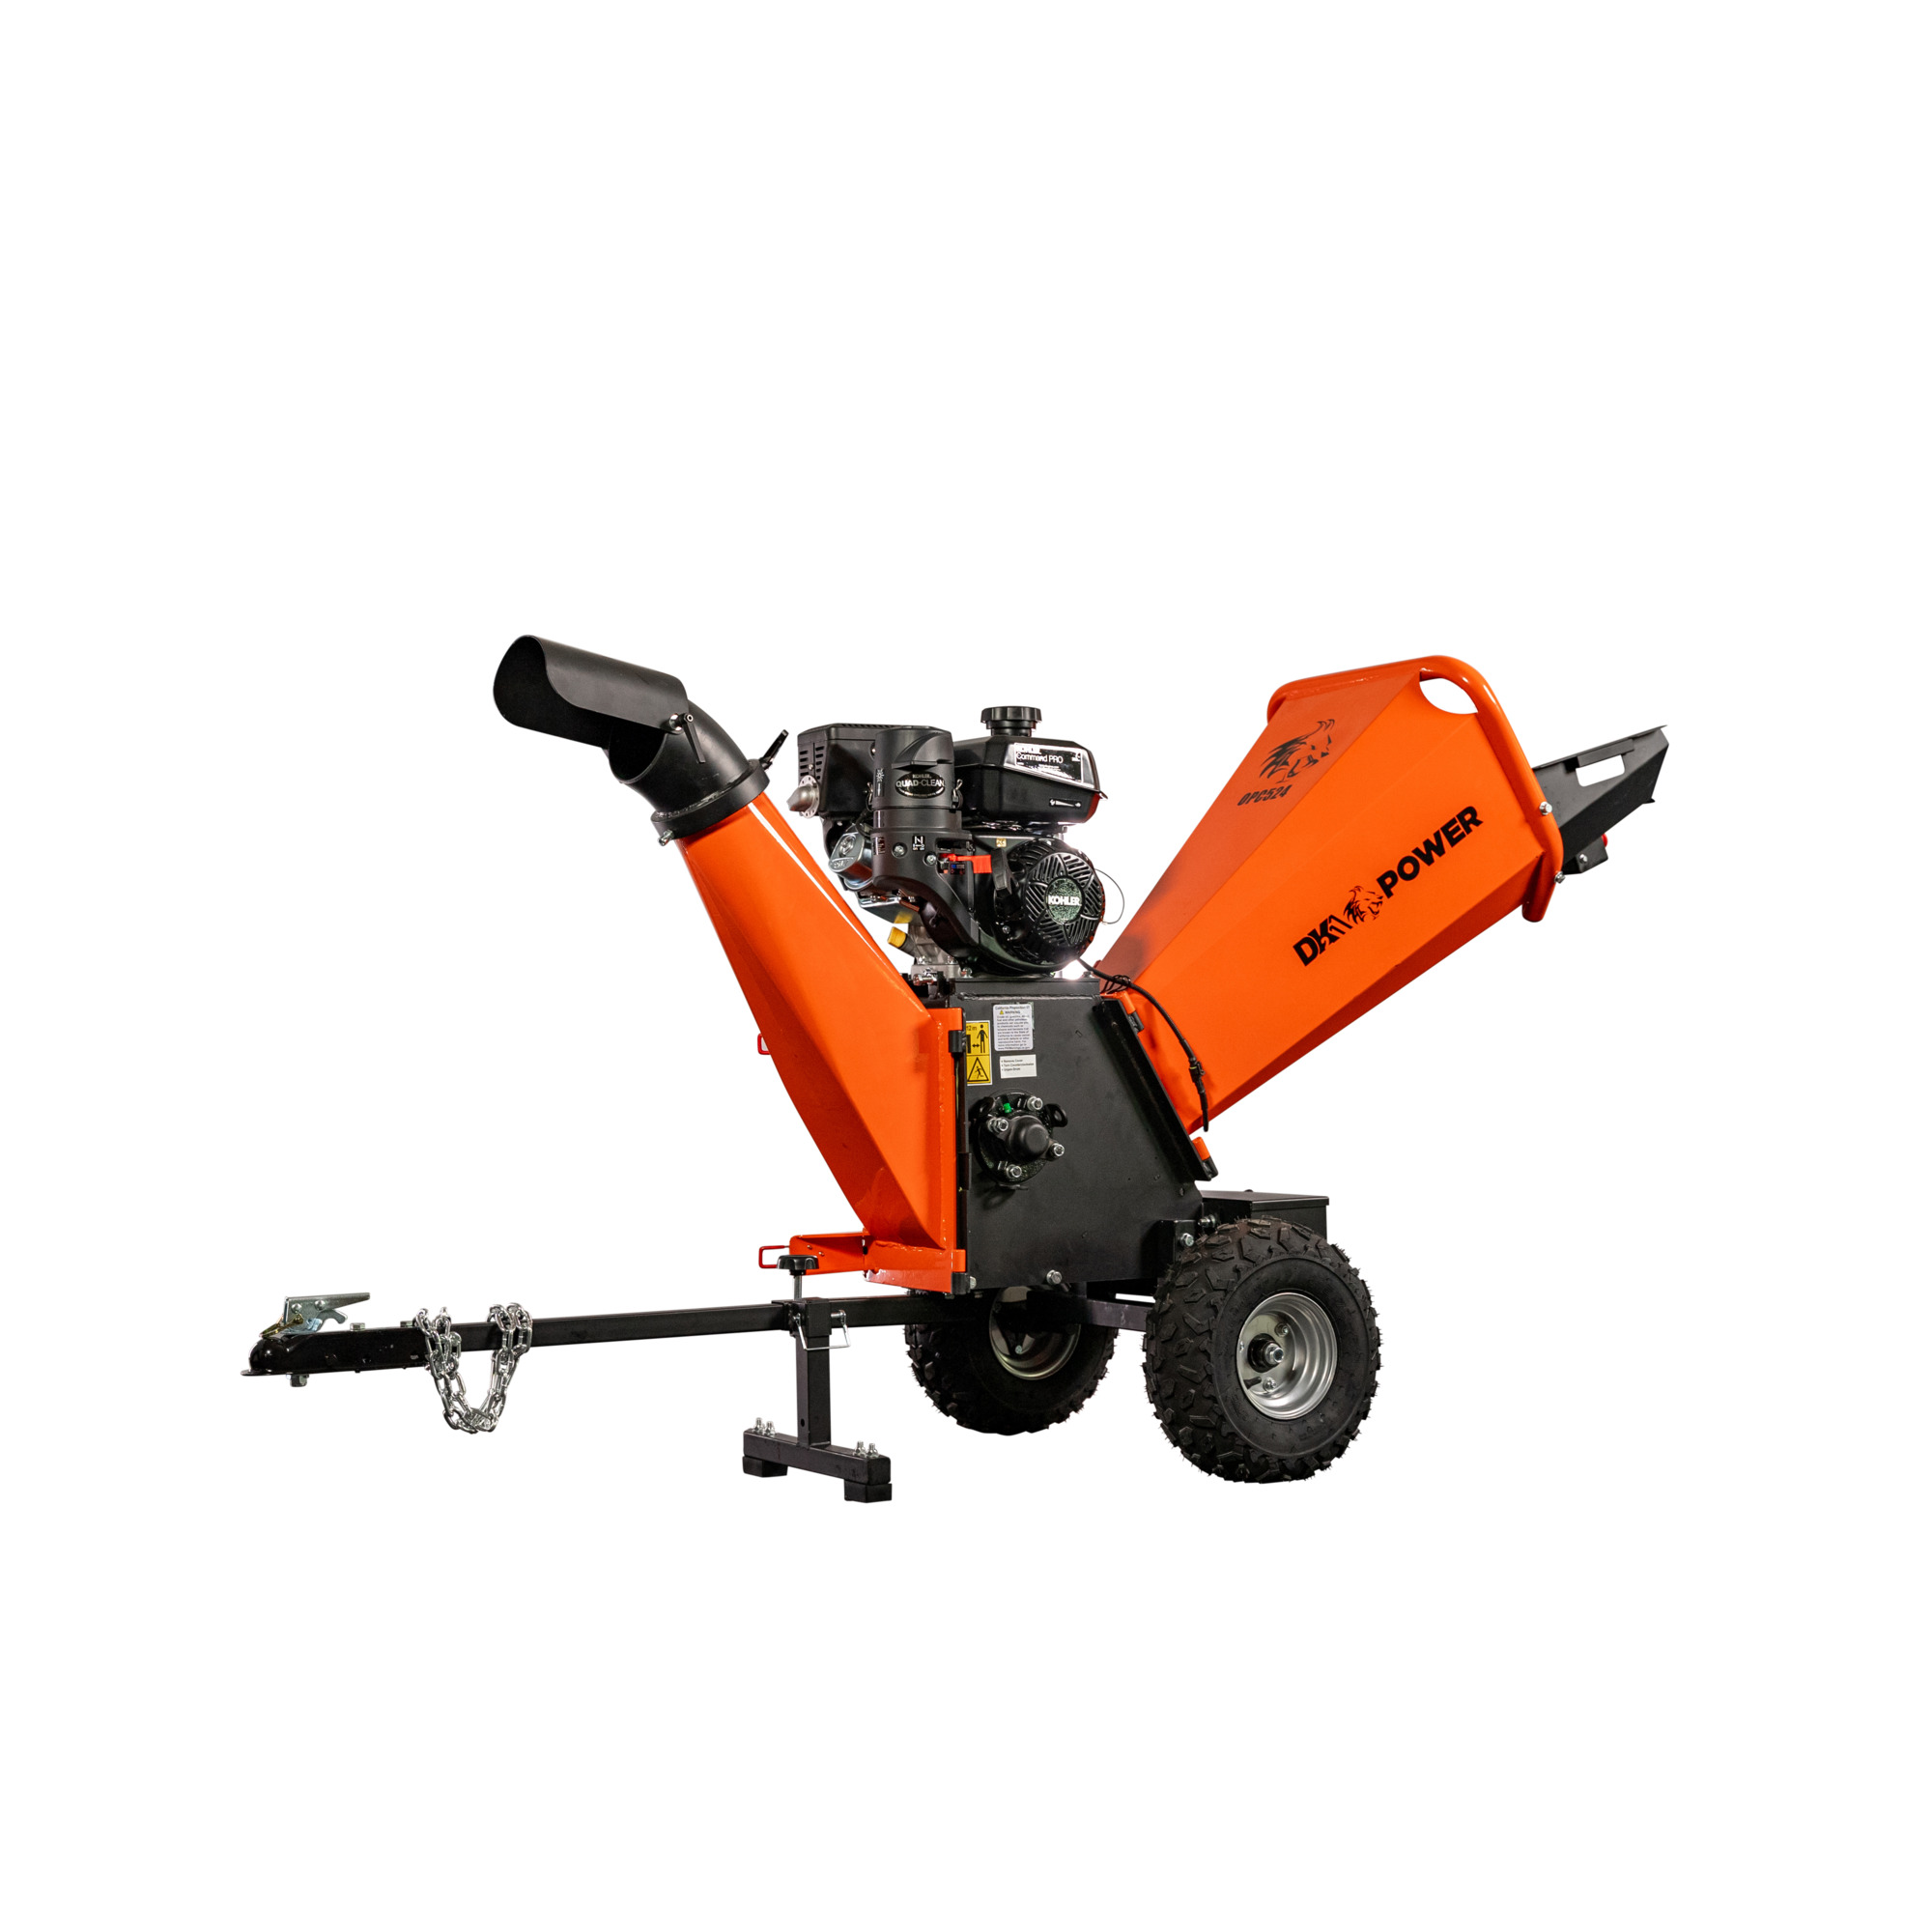 DK2 Power, 5Inch Kinetic Drum Chipper 9.5HP 277cc Engine, Engine Displacement 277 cc, Horsepower 9.5, Max. Cutting Thickness 5 in, Model OPC525